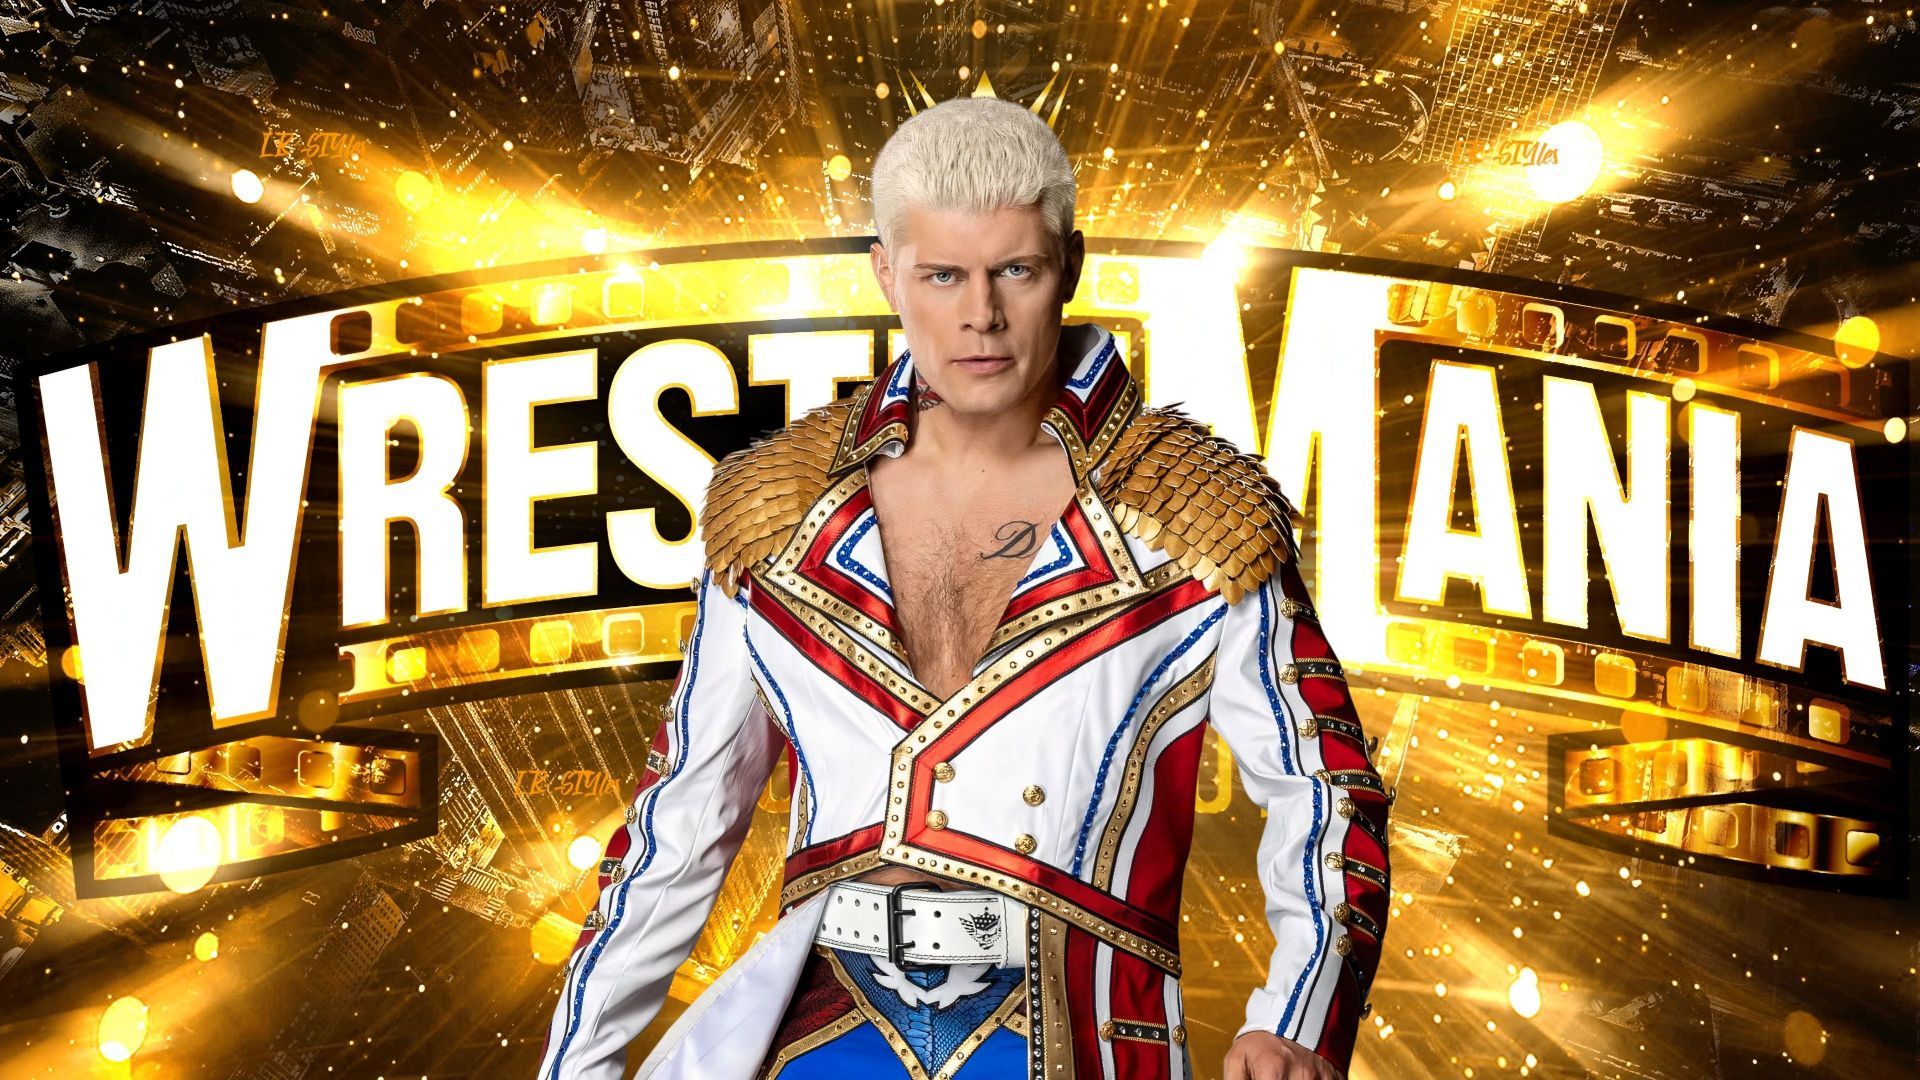 Cody Rhodes is currently suffering from a torn pectoral injury.